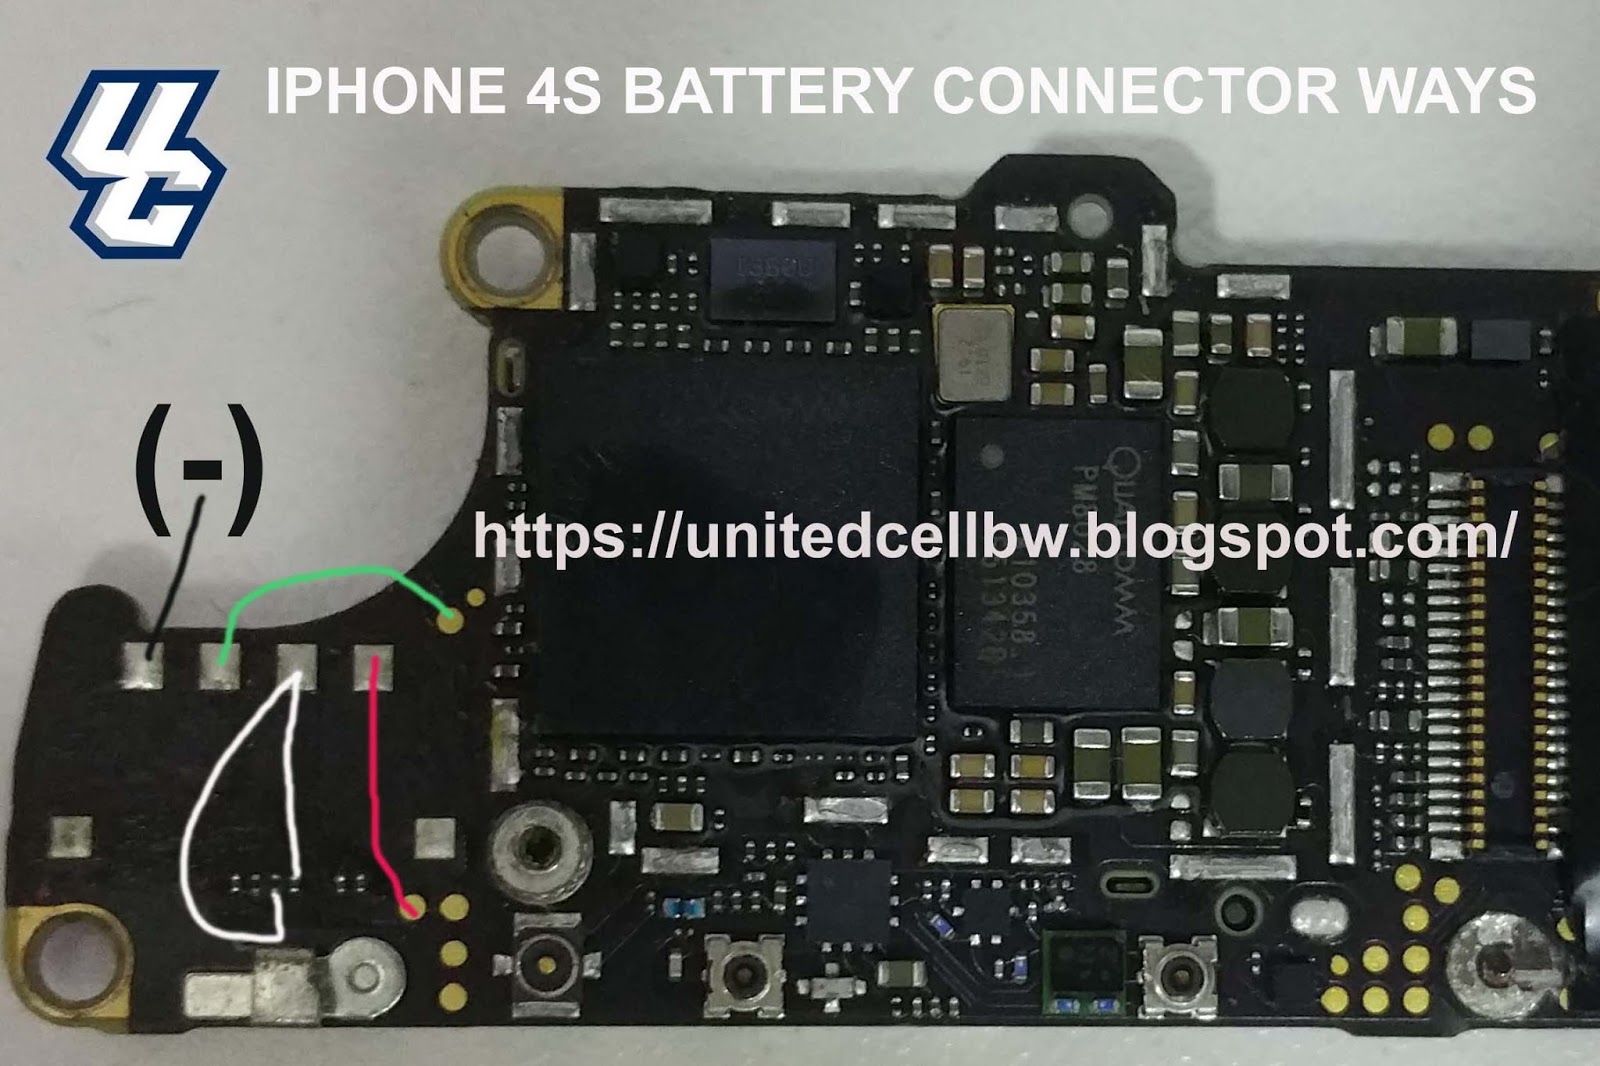 UNITED CELL MOBILE EXPERTS: iphone 4s battery connector ways